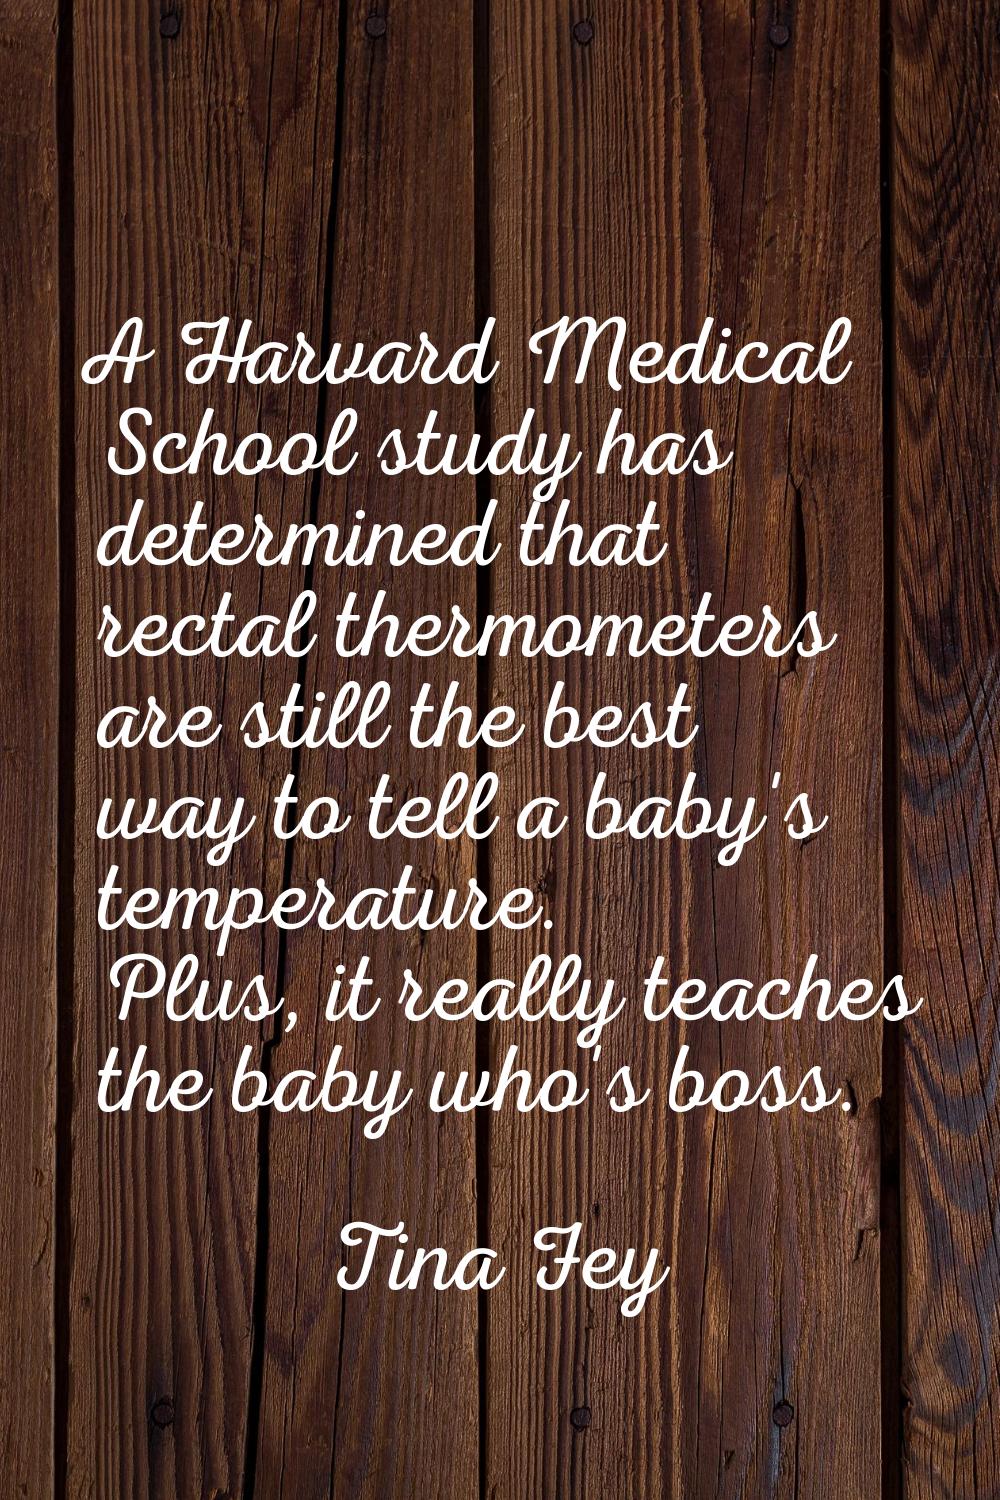 A Harvard Medical School study has determined that rectal thermometers are still the best way to te